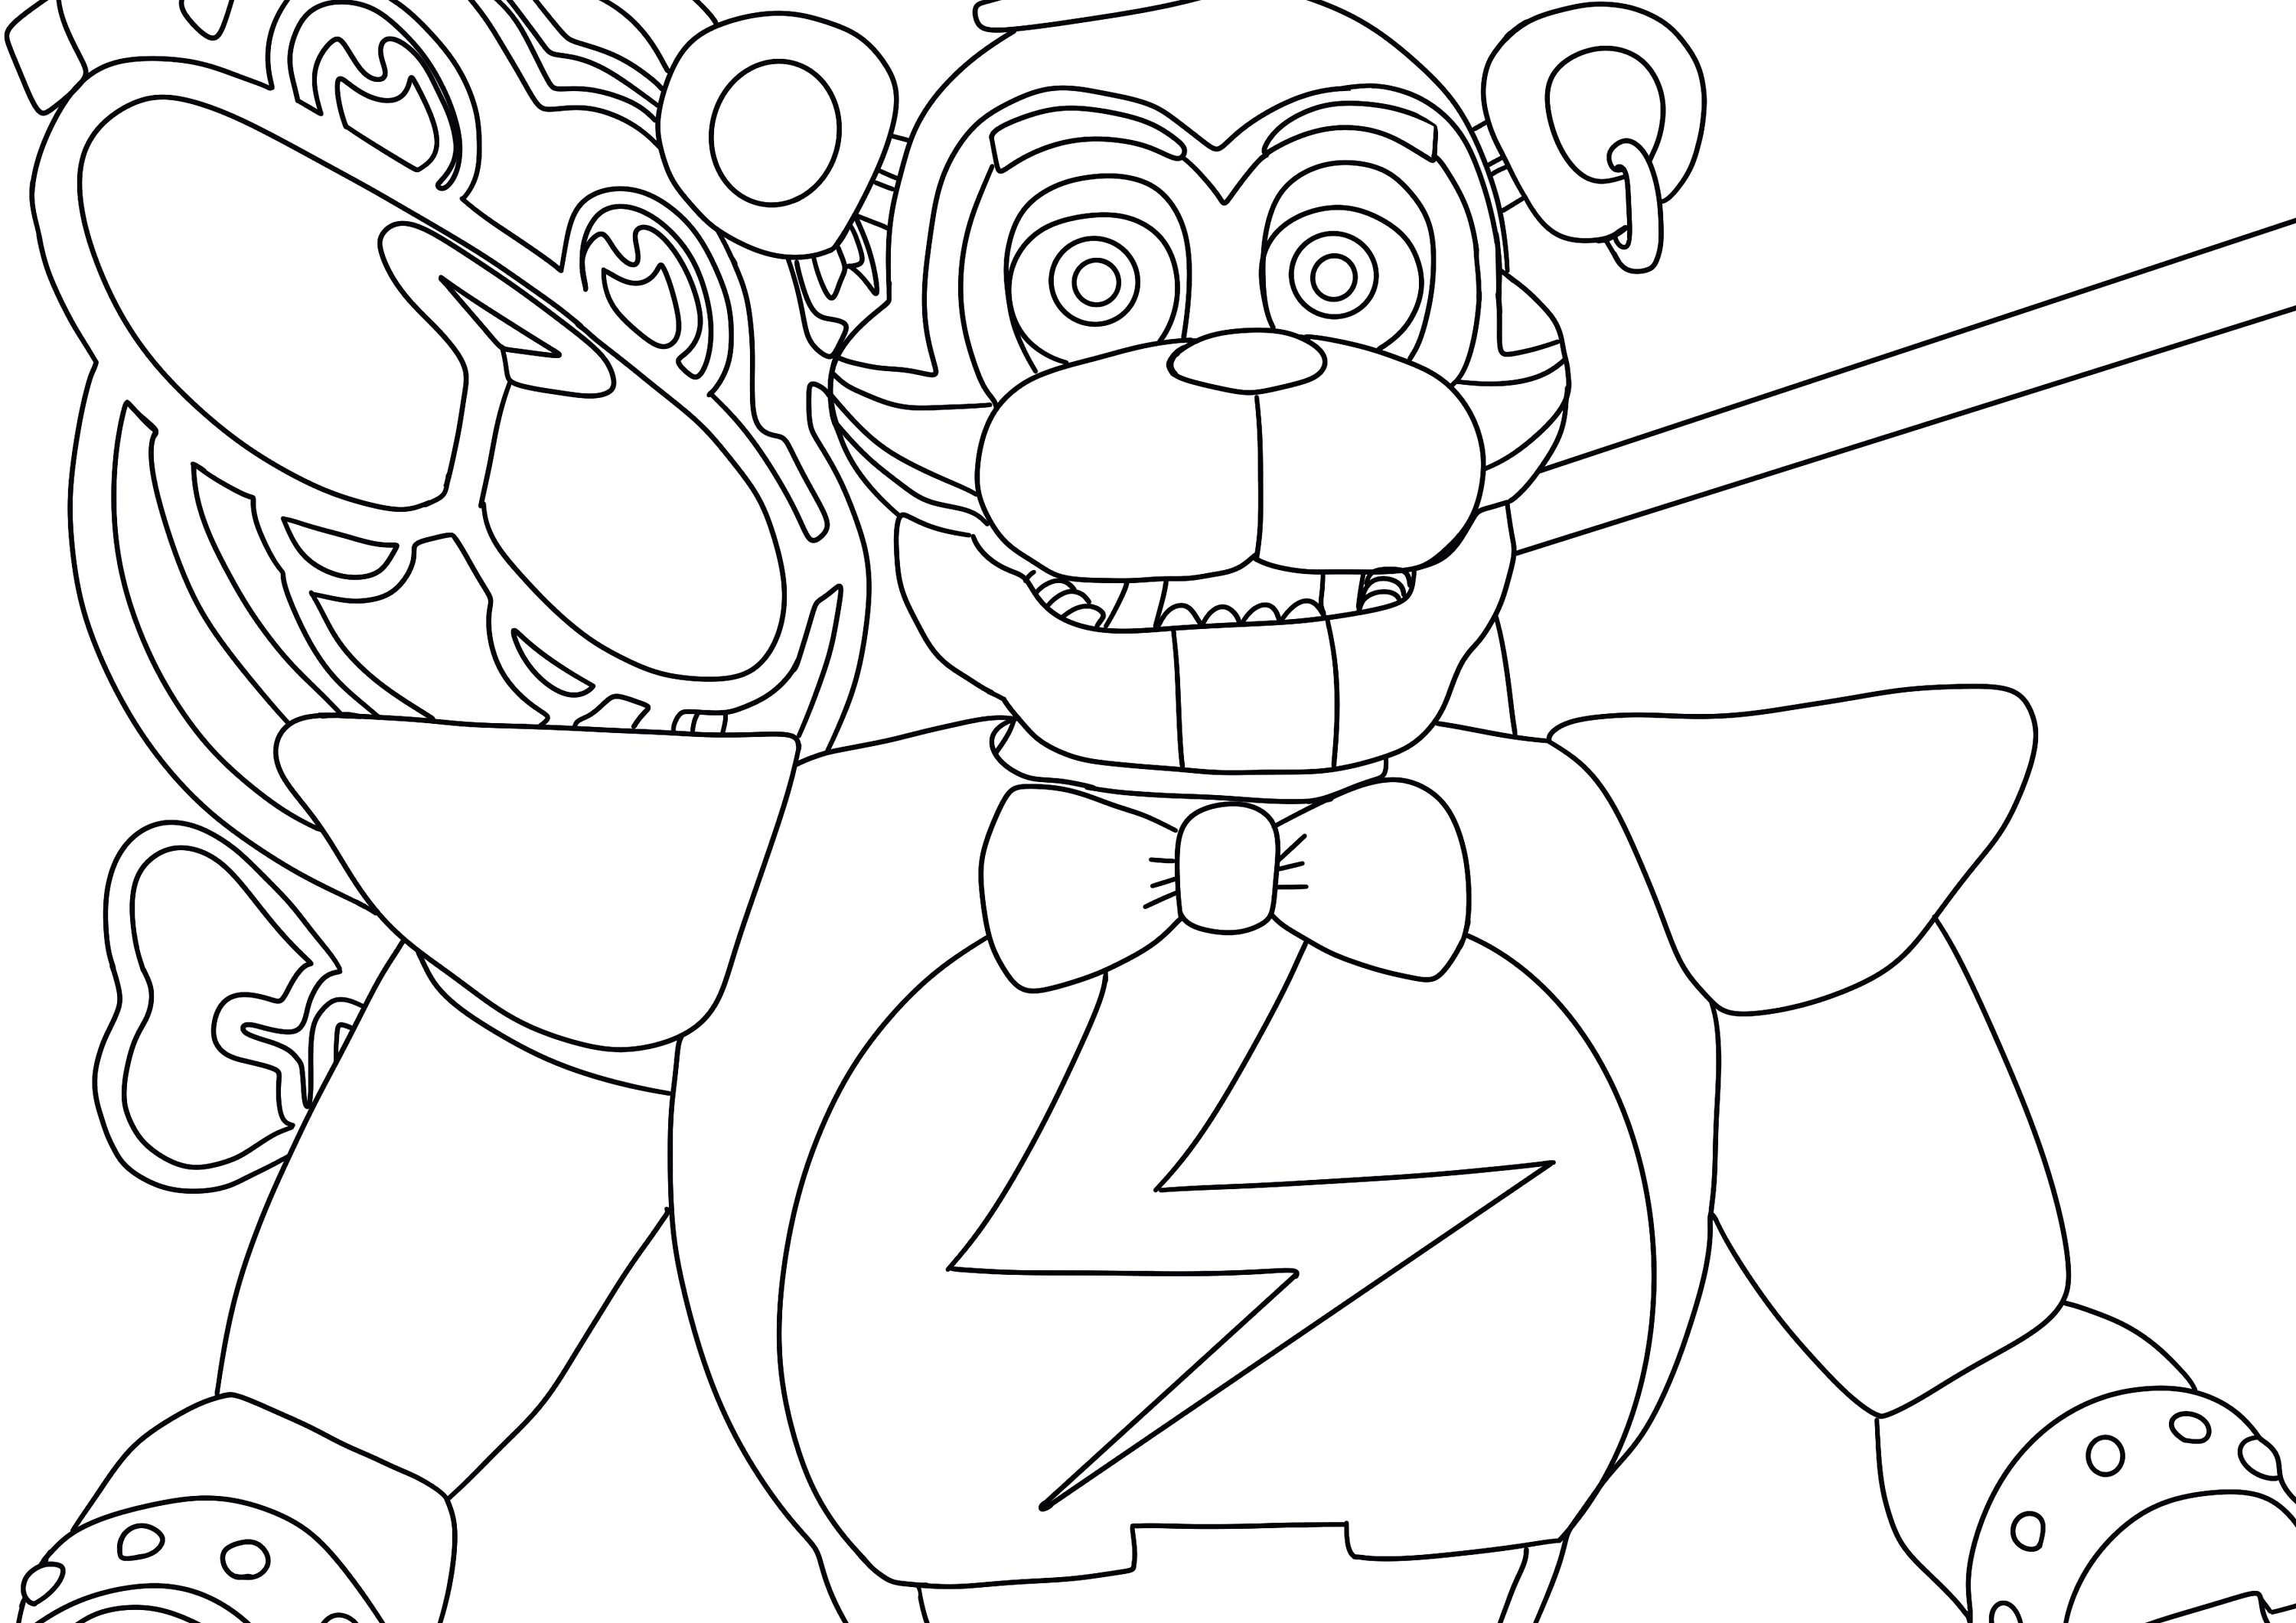 A4 Digital Downloadable Adult Colouring Page Five Nights at - Etsy